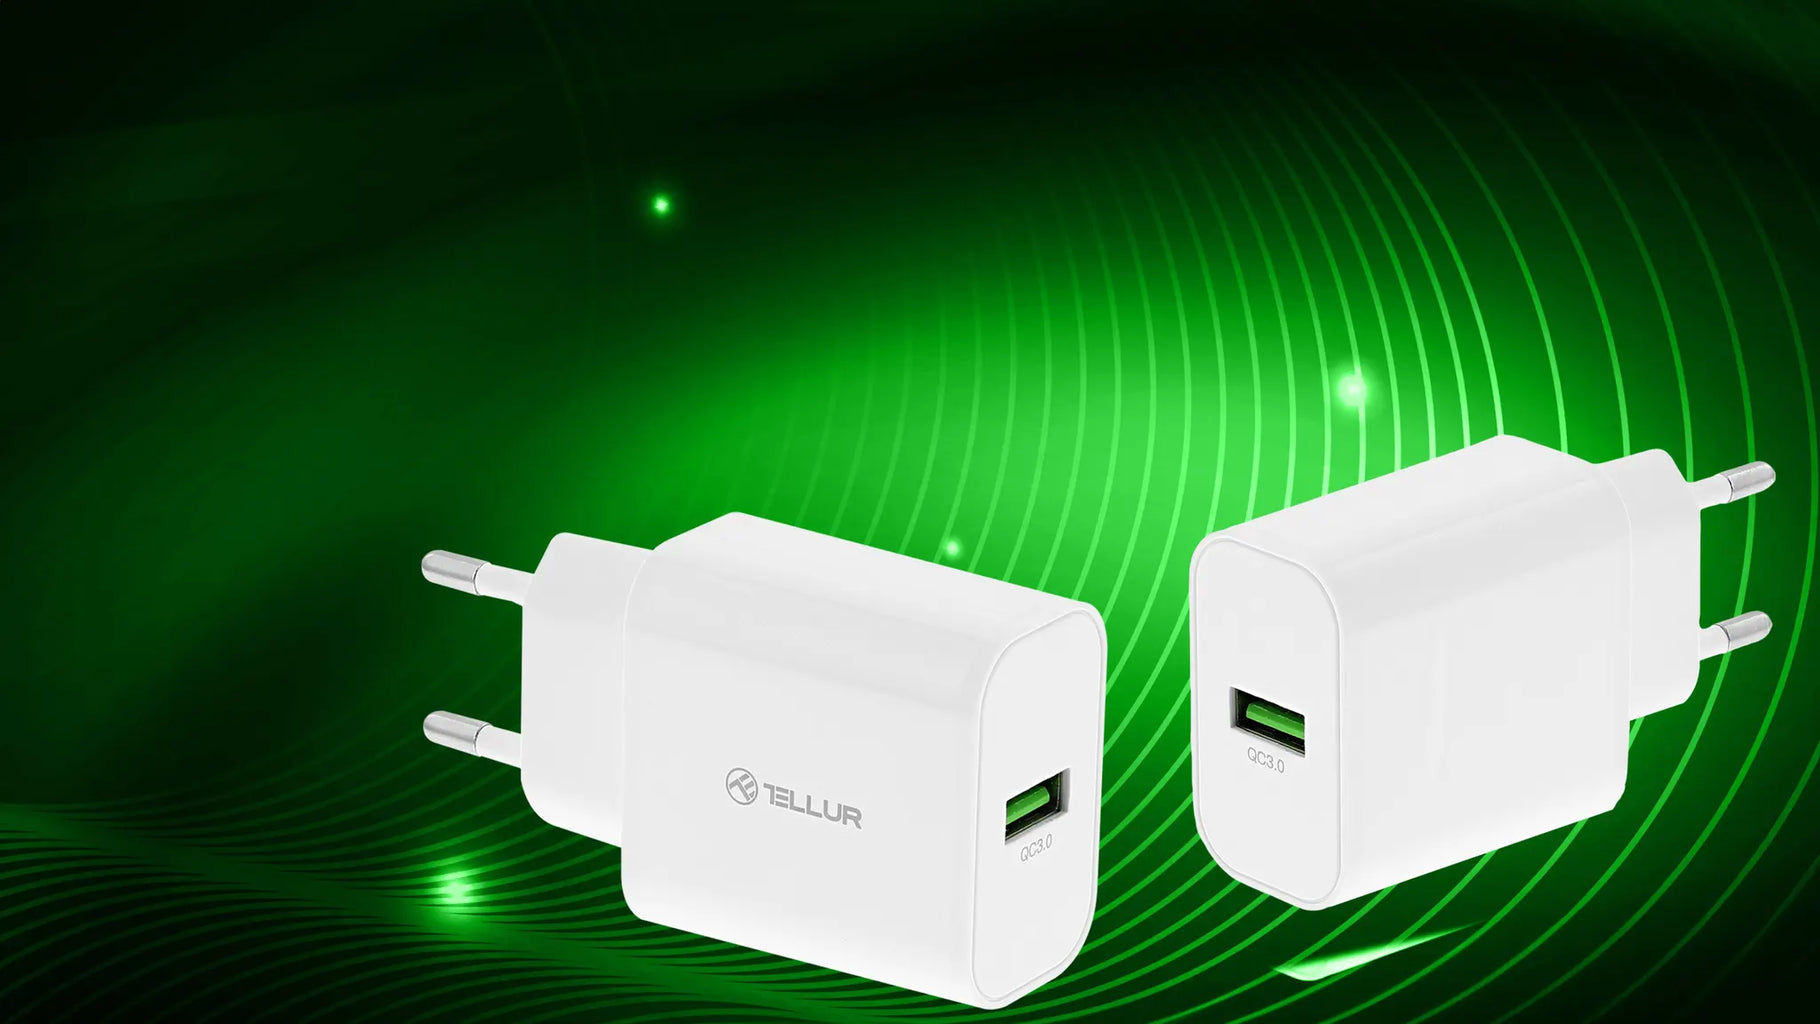 QC 3.0 Wall Charger - 18 W